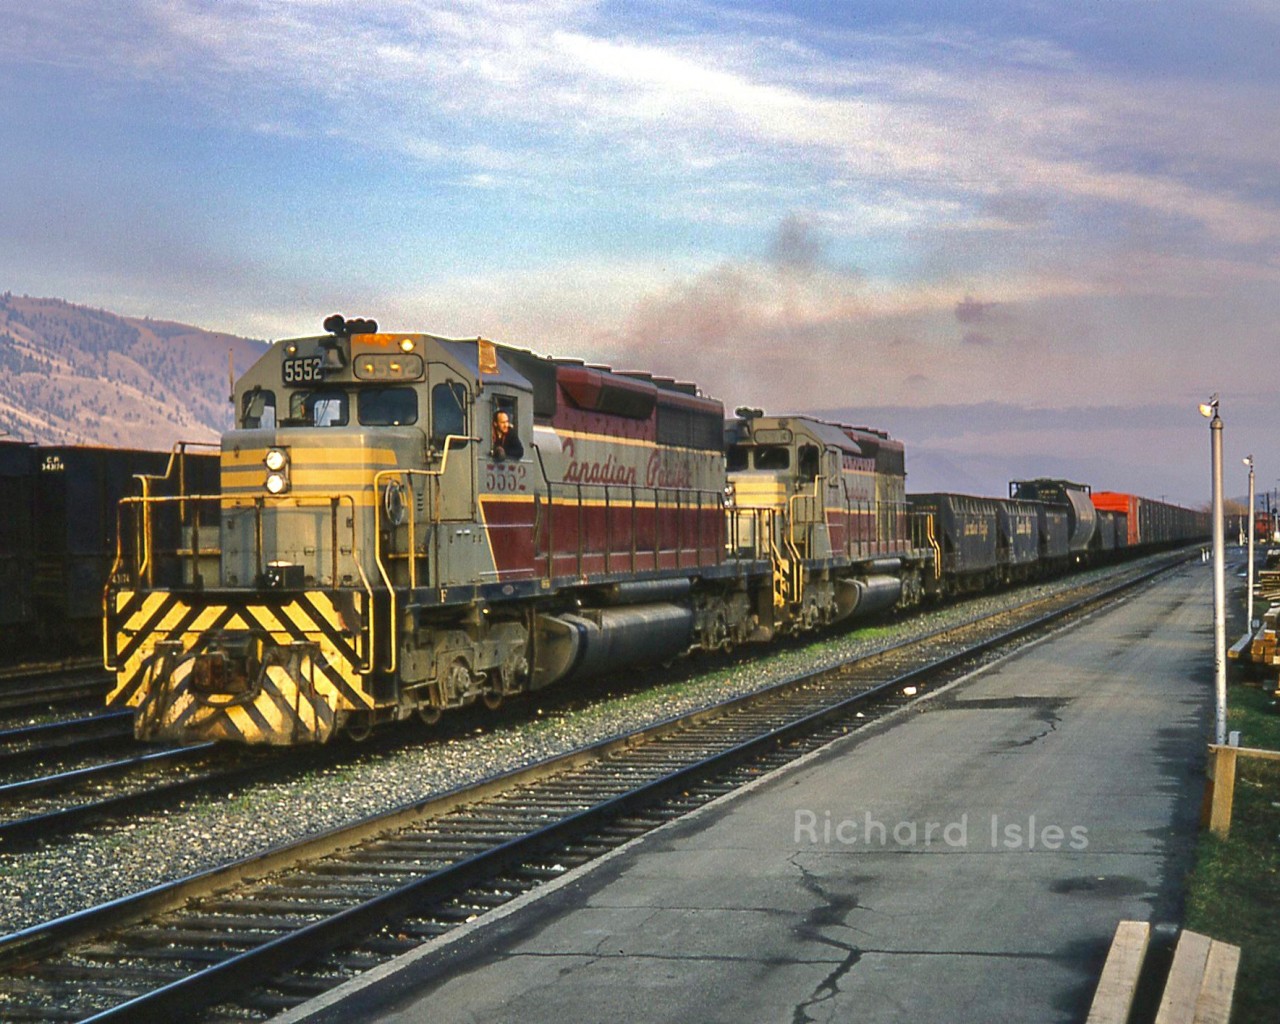 Canadian Pacific Railway GMD SD40s in the wine and grey script paint scheme. CPR 5552+5543 is leaving as a Westbound Extra at Kamloops British Columbia ????????, Shuswap Sub. on October 25, 1969.